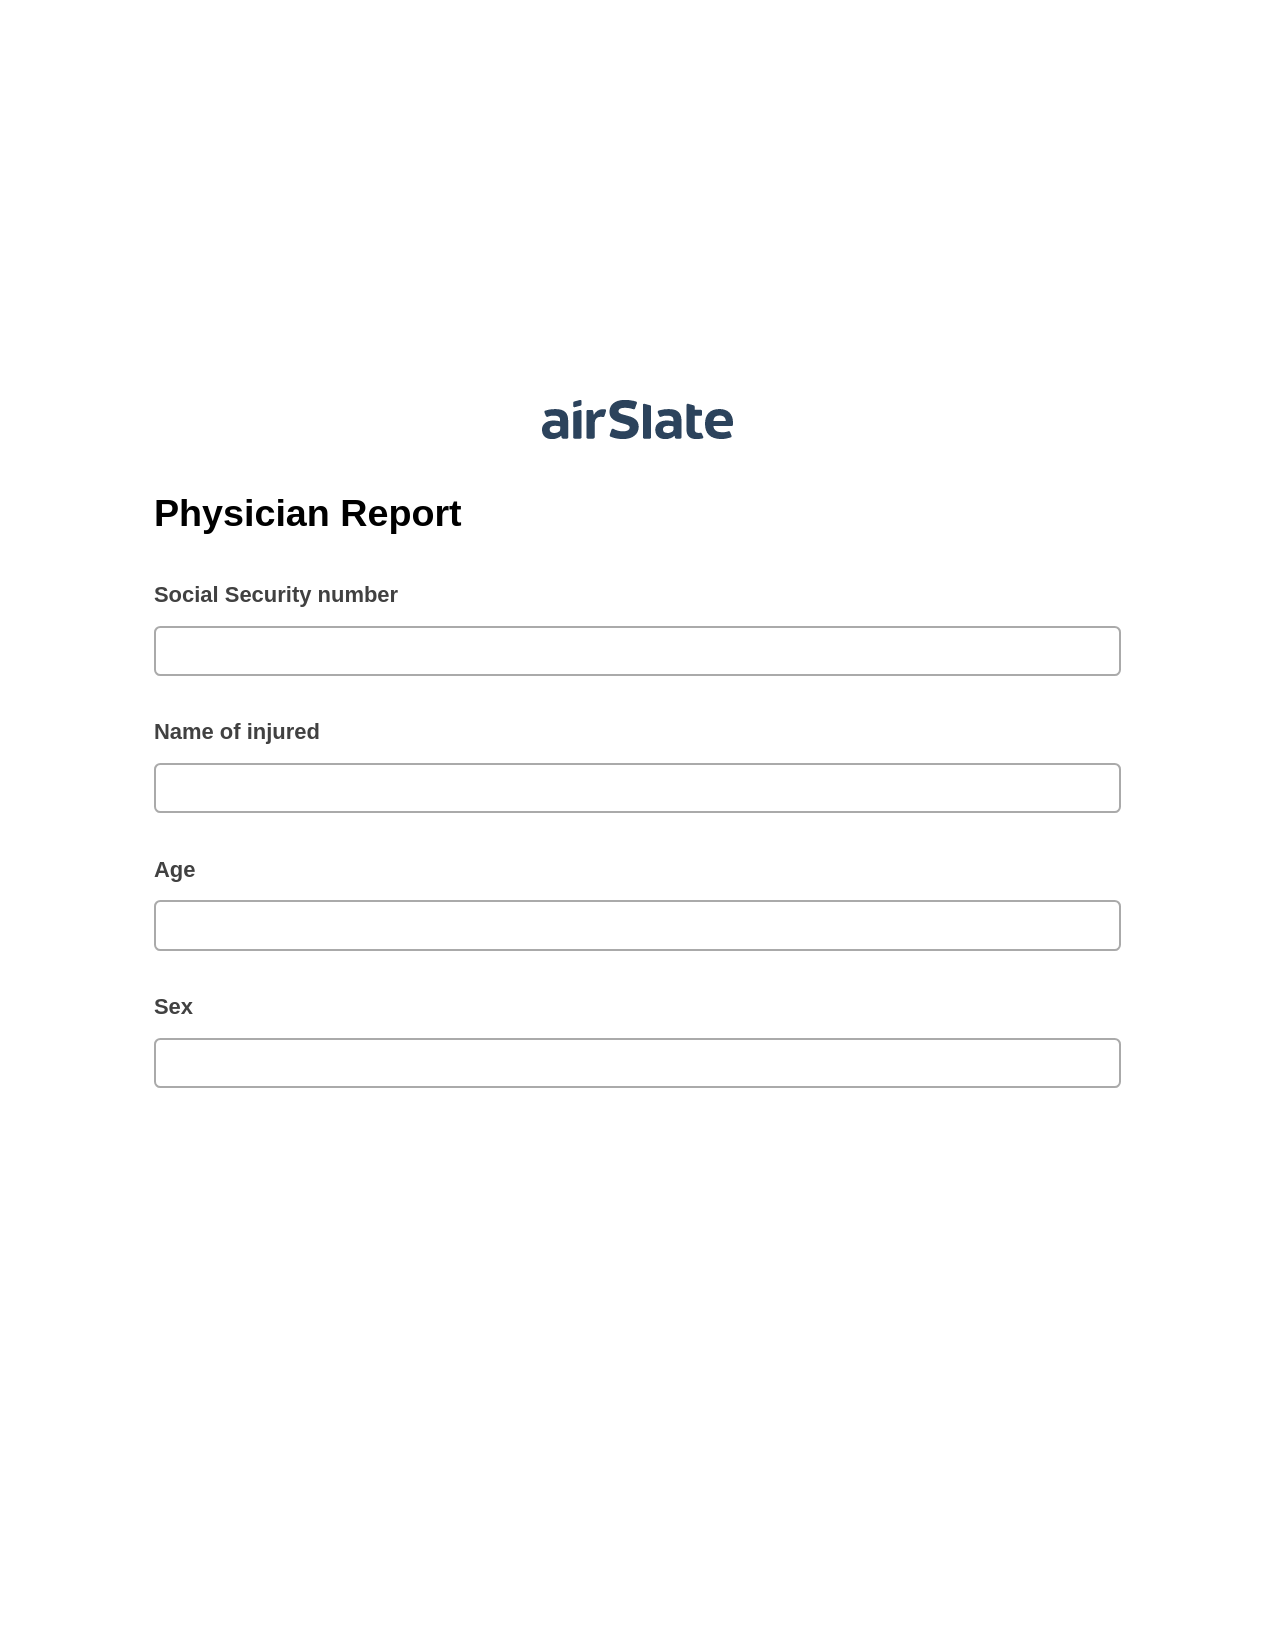 Multirole Physician Report Pre-fill Dropdowns from Excel Bot, Update MS Dynamics 365 Record Bot, Export to Excel 365 Bot